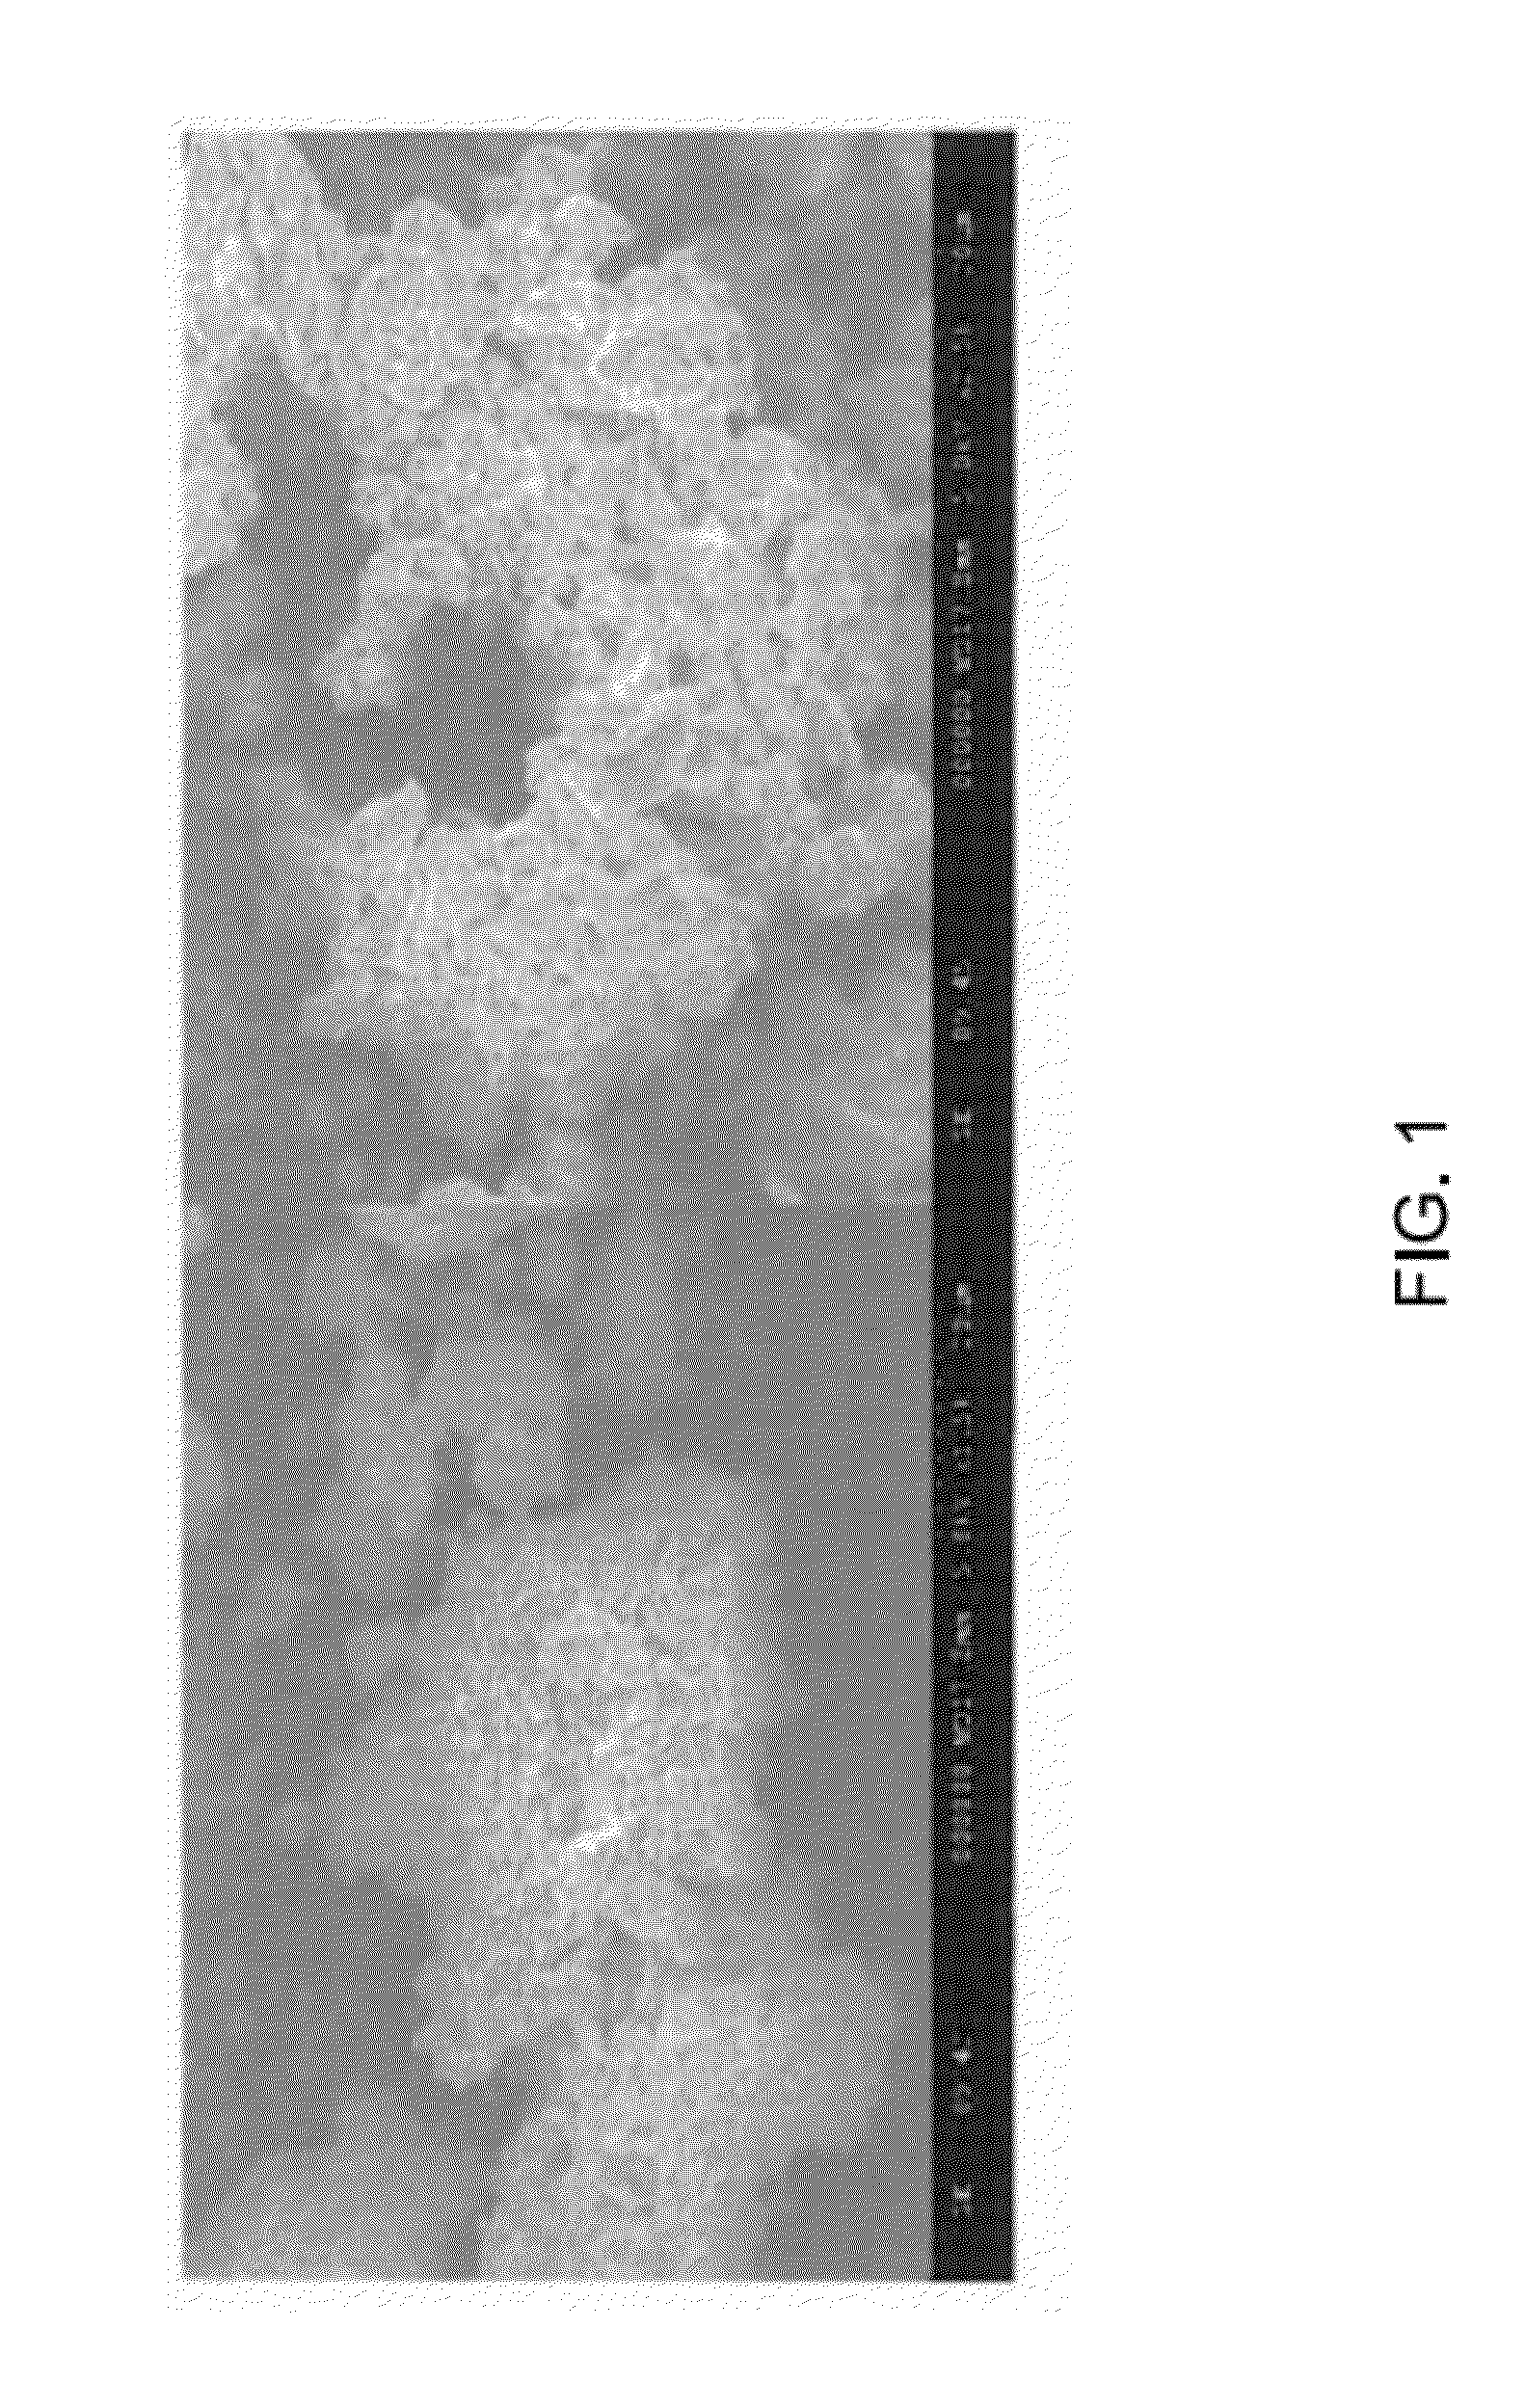 Method of Forming a Metal Phosphate Coated Cathode for Improved Cathode Material Safety